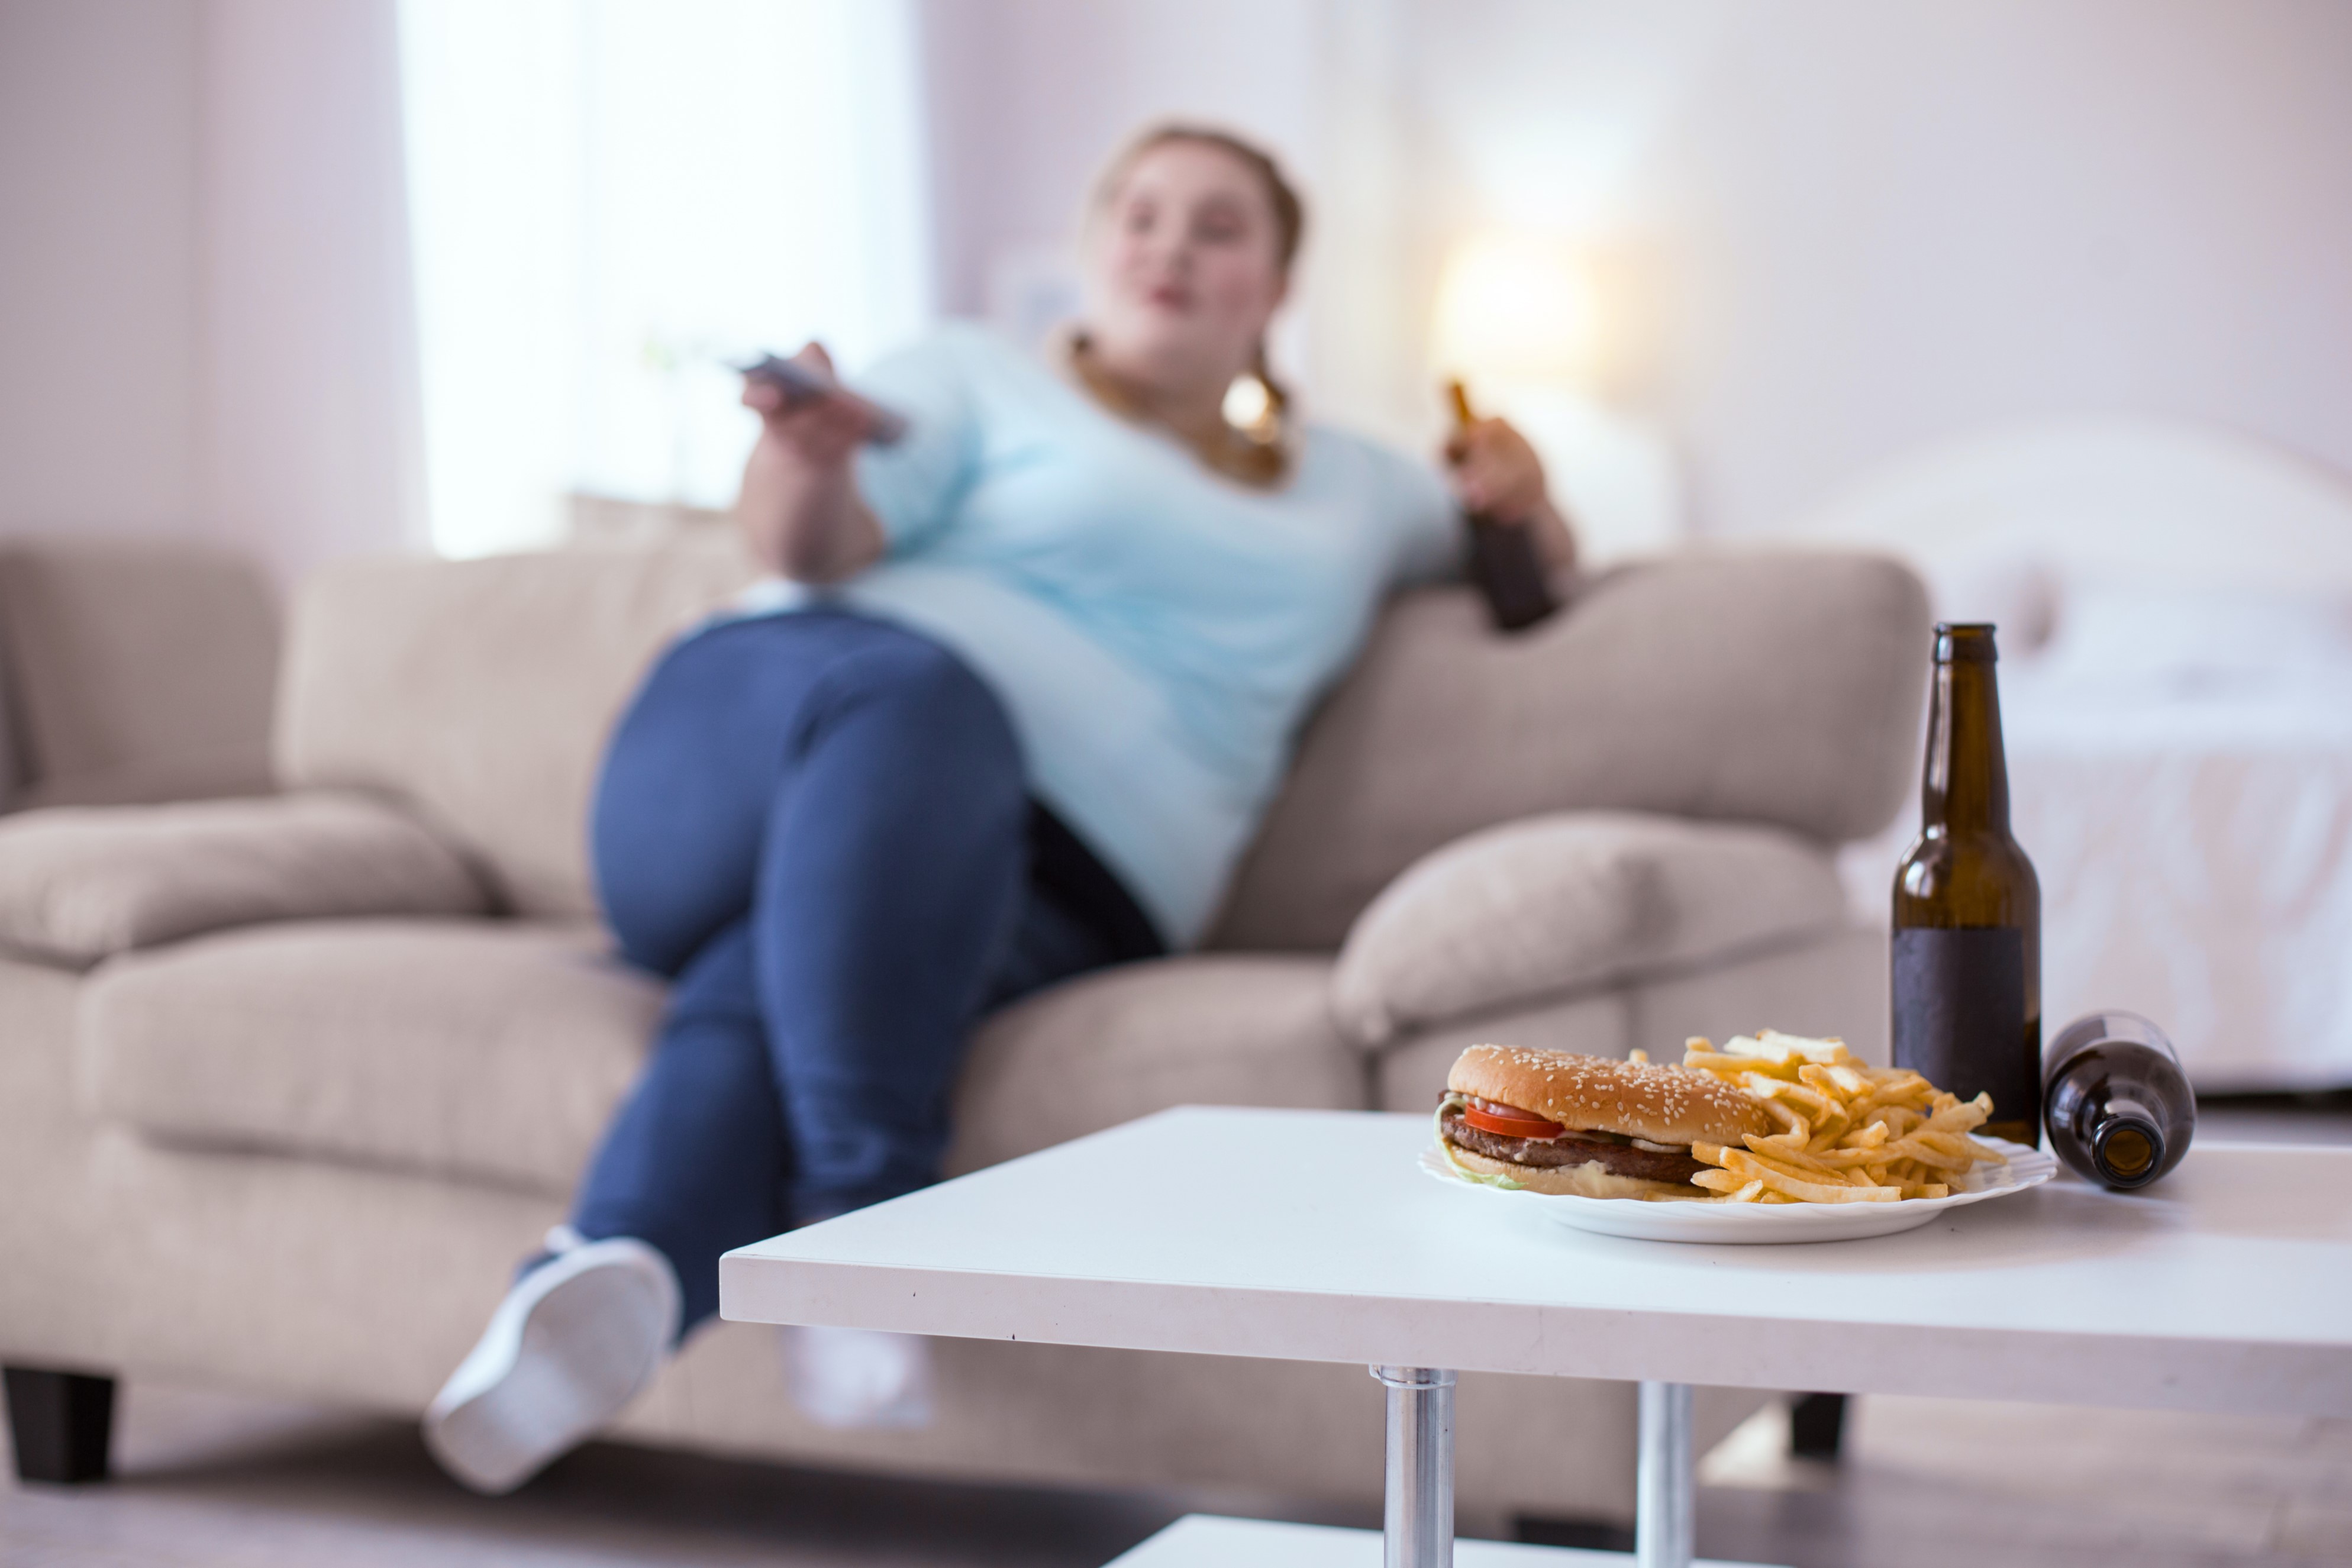 Couch Potato Syndrome Worldhealth Net Anti Aging News